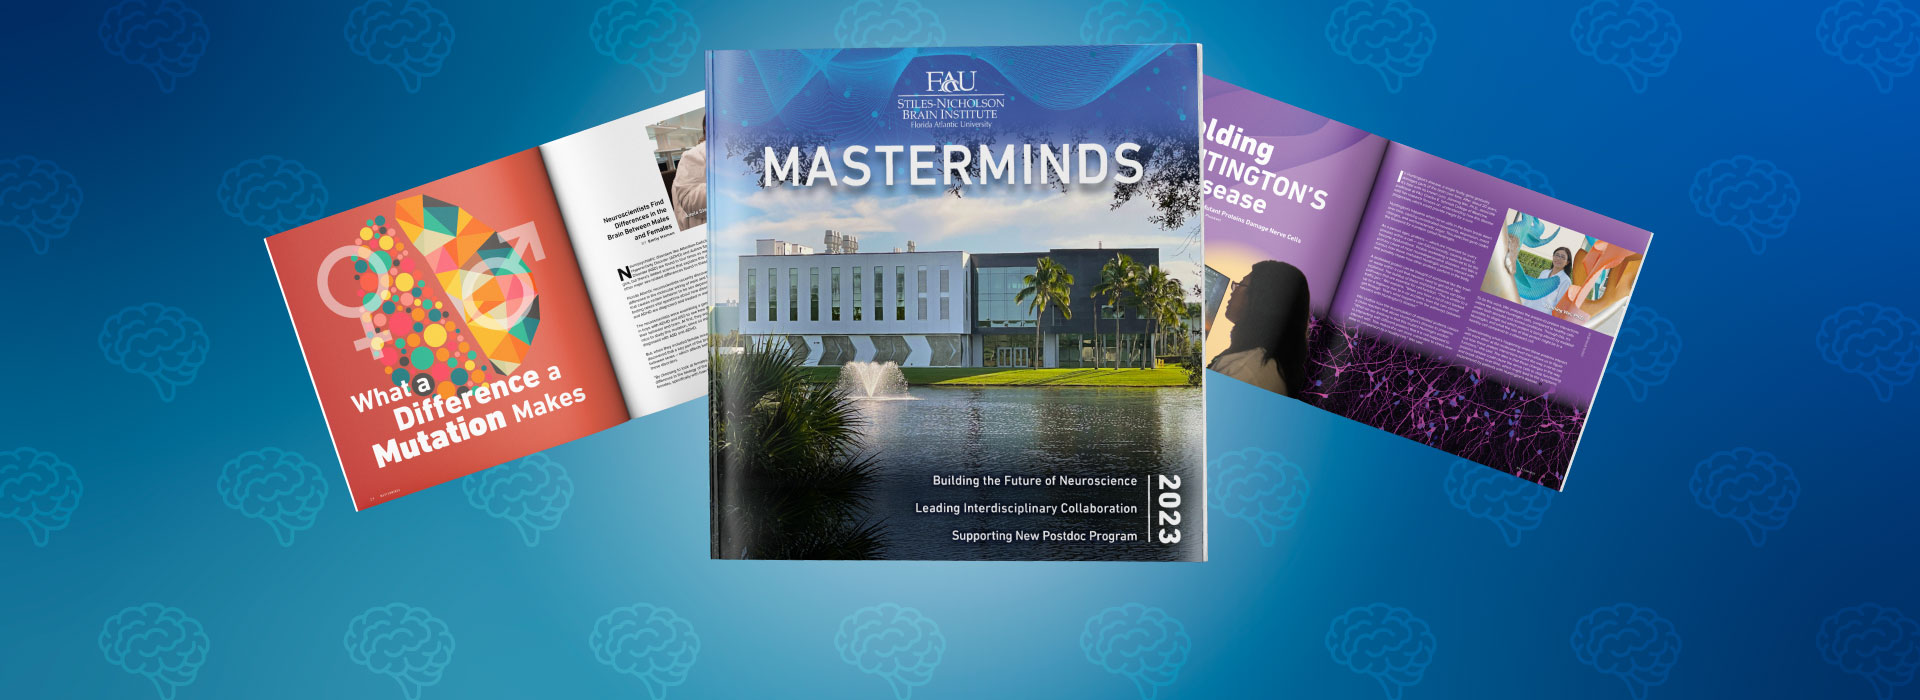 Masterminds Magazine cover and pages